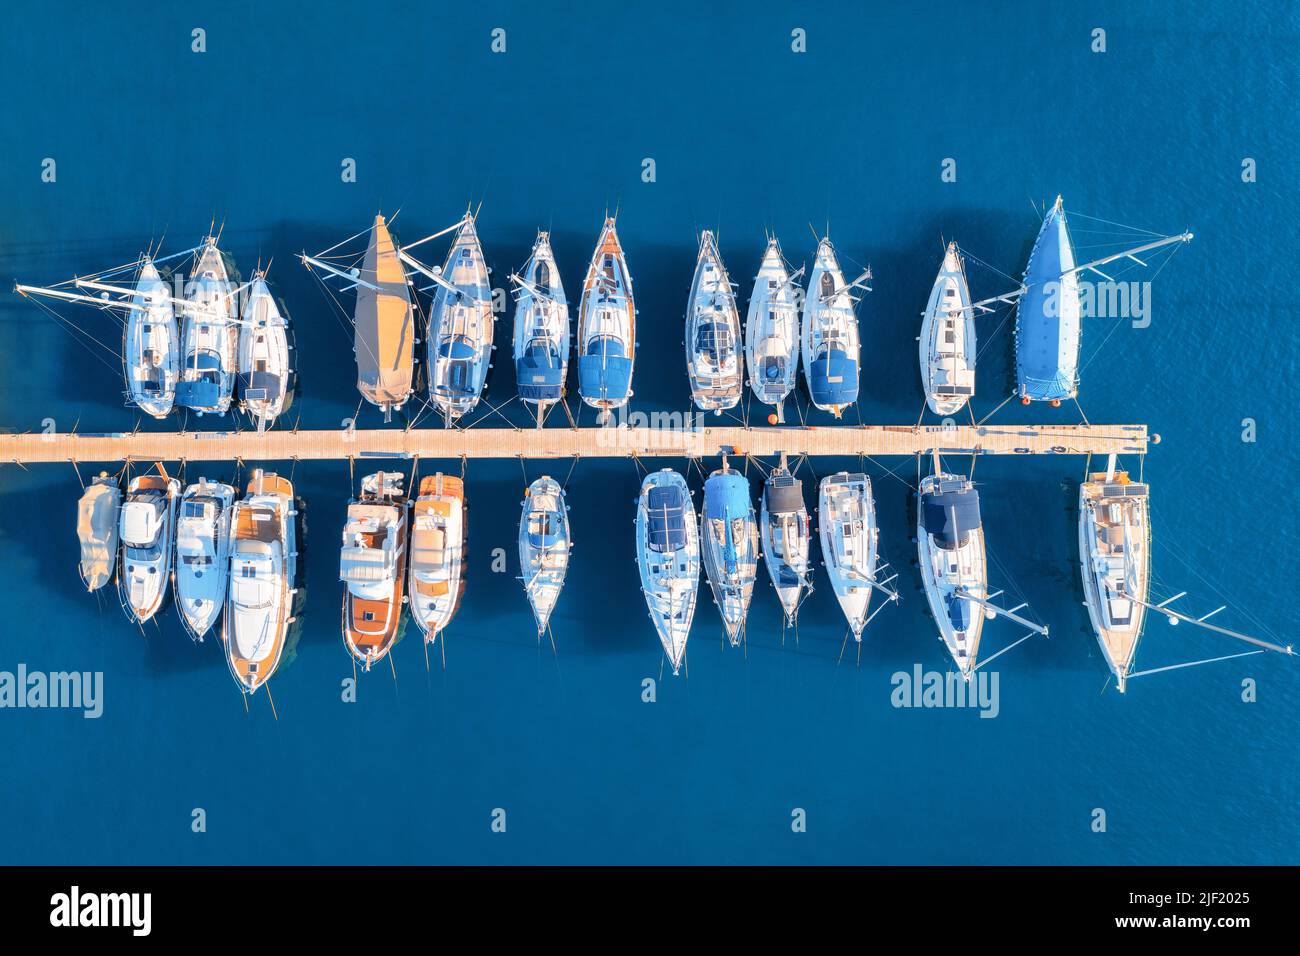 Aerial view of boats and yachts in dock at sunset in summer Stock Photo